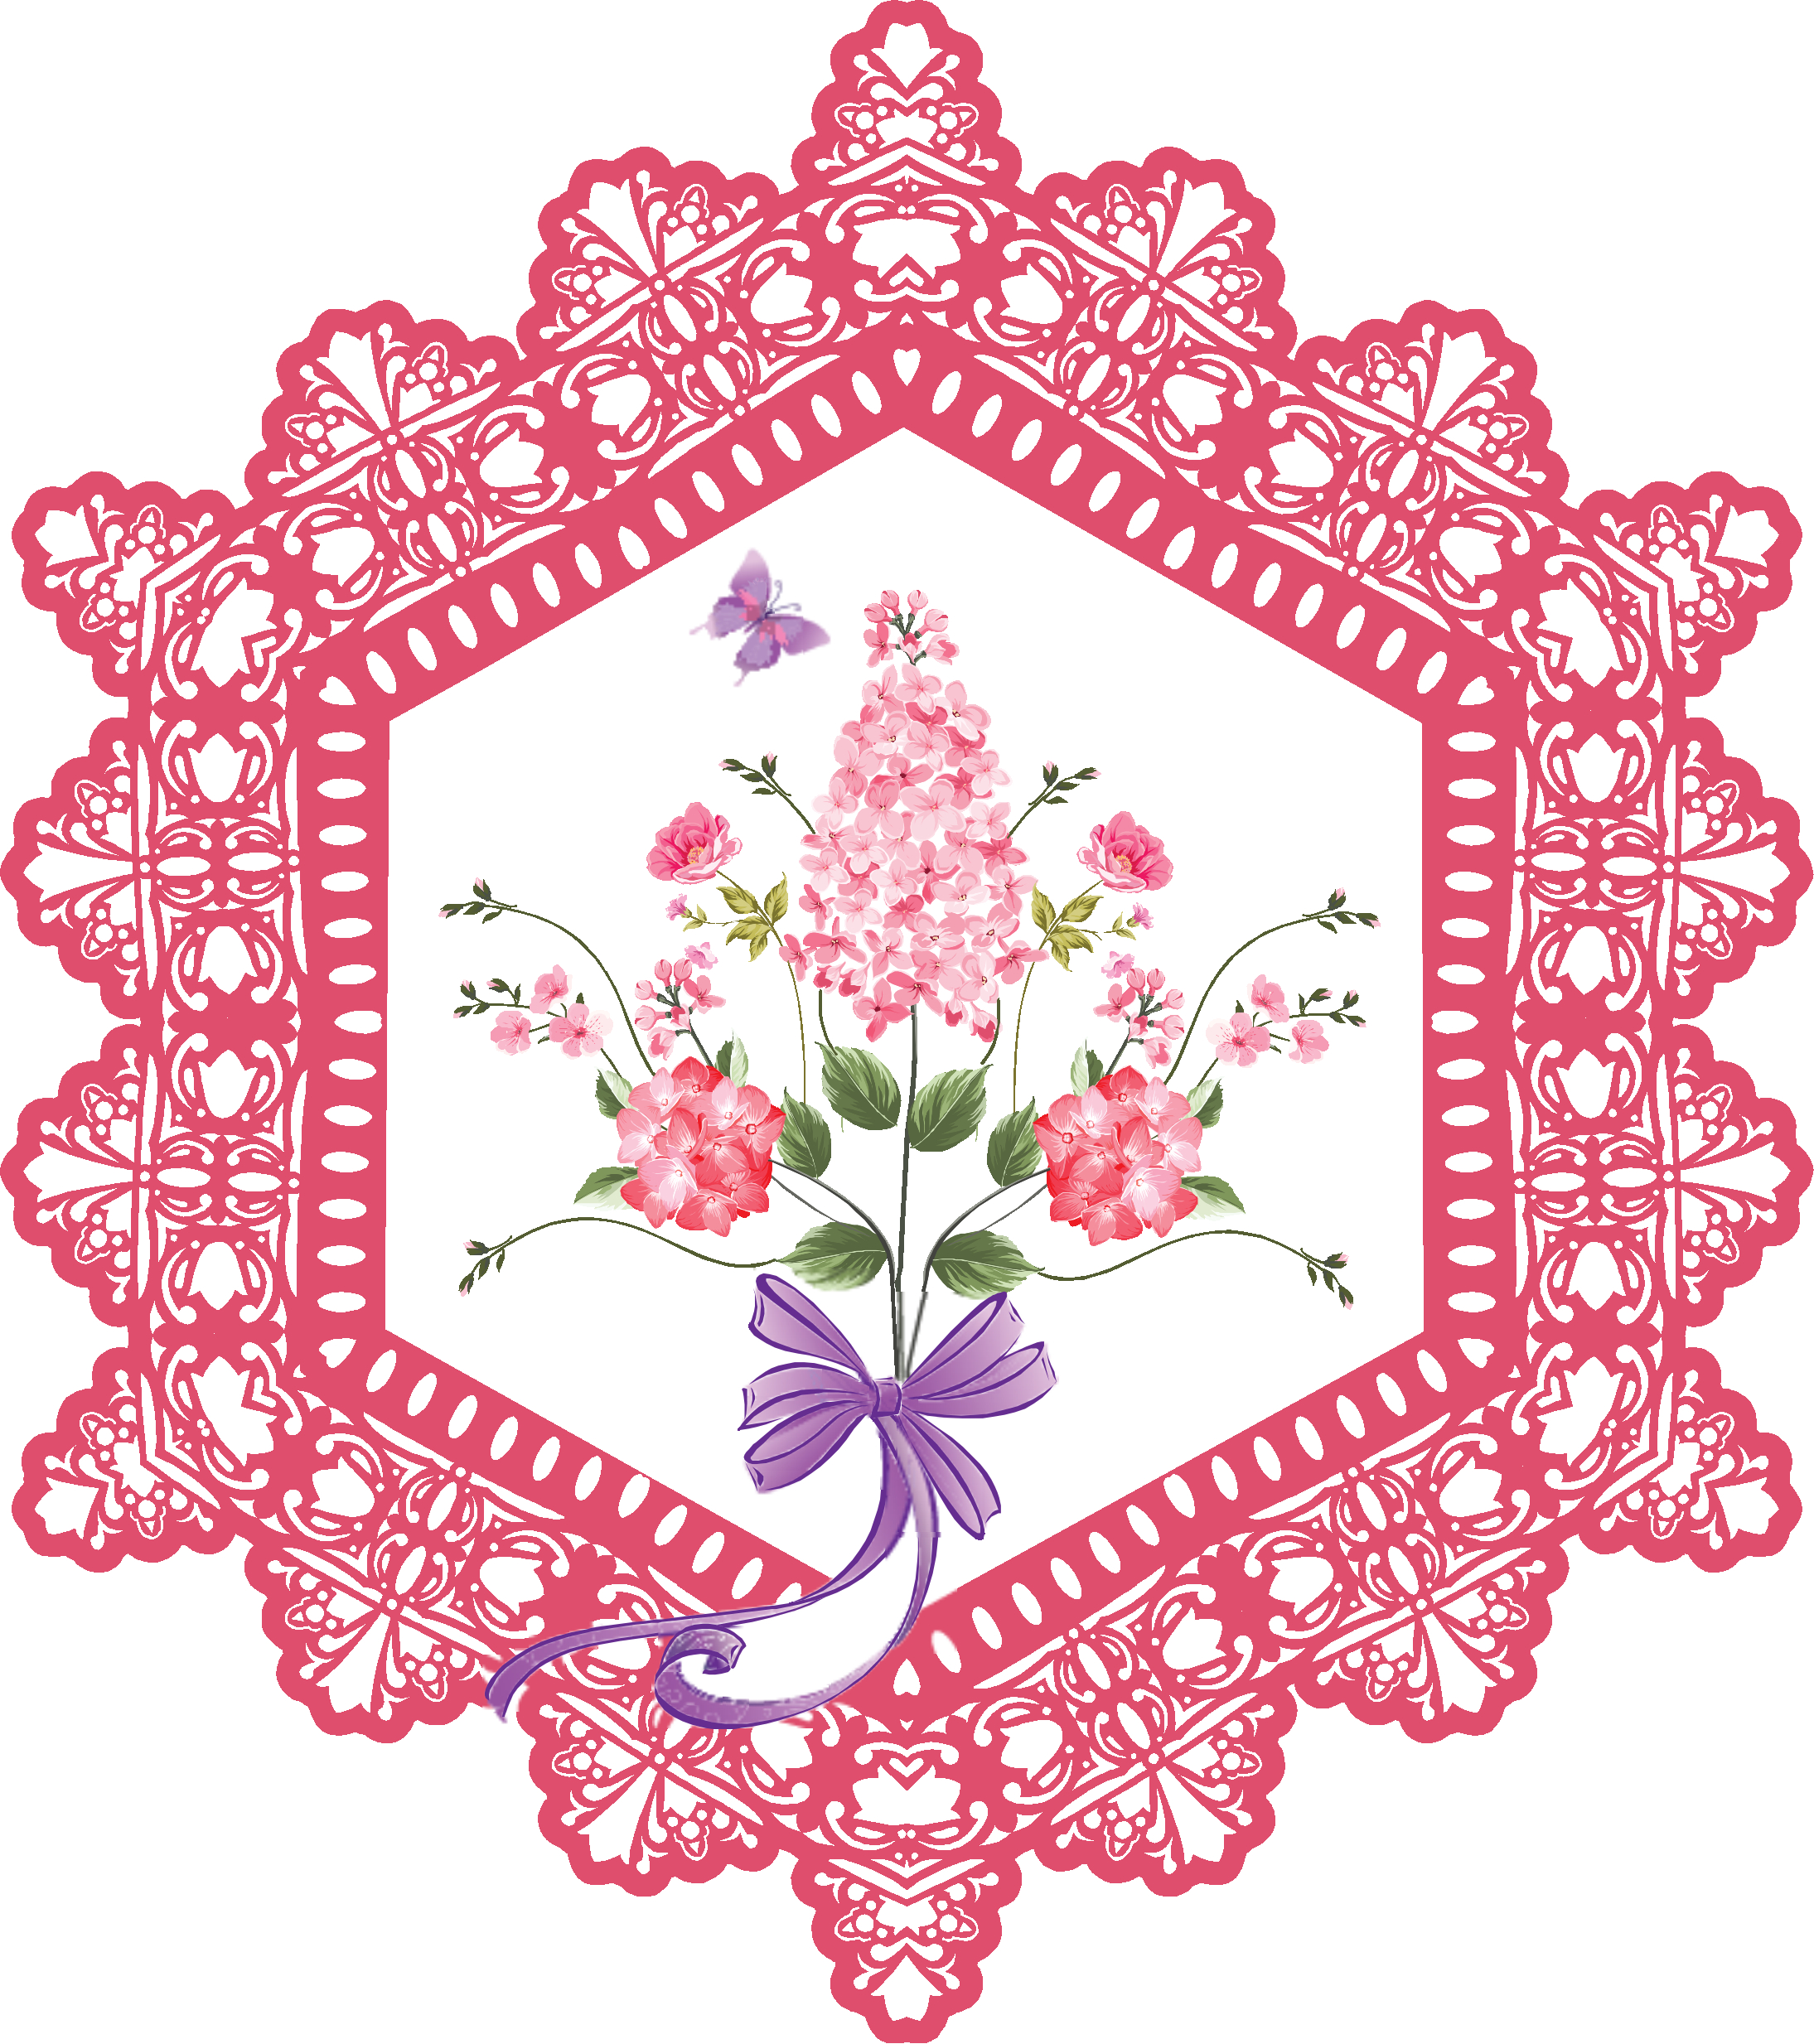 Card Embroidery Patterns Hd Florals And Lace Is A Downloadable Machine Embroidery In